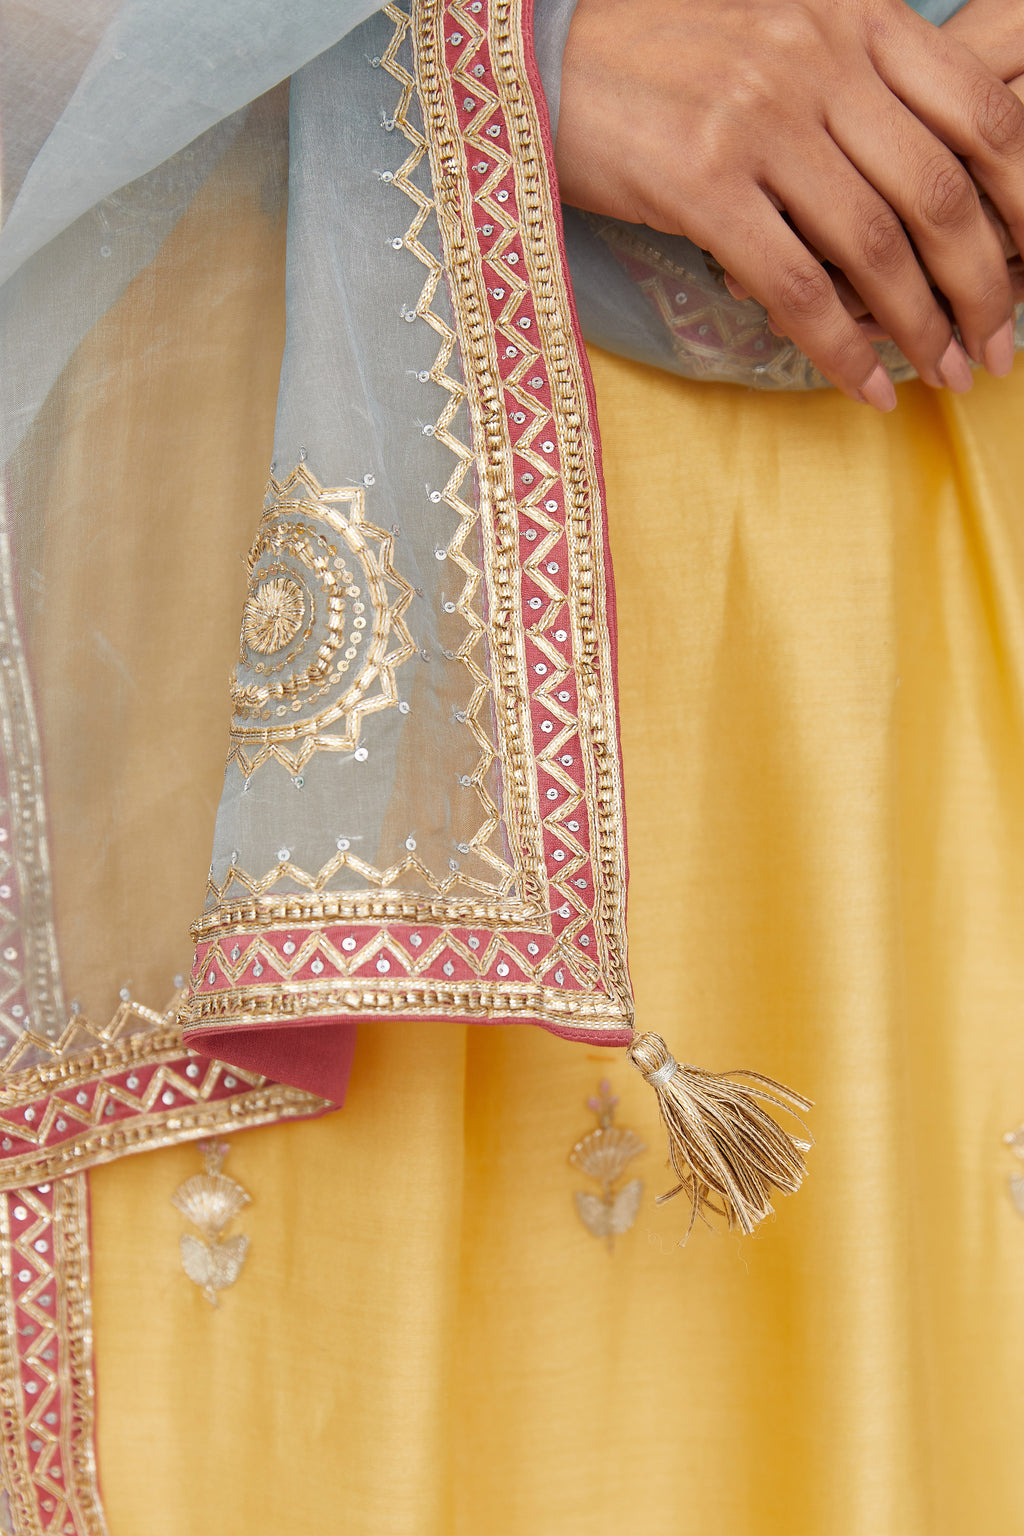 Blue silk organza dupatta with delicate gold gota embroidery and contrast colored border running along all edges.